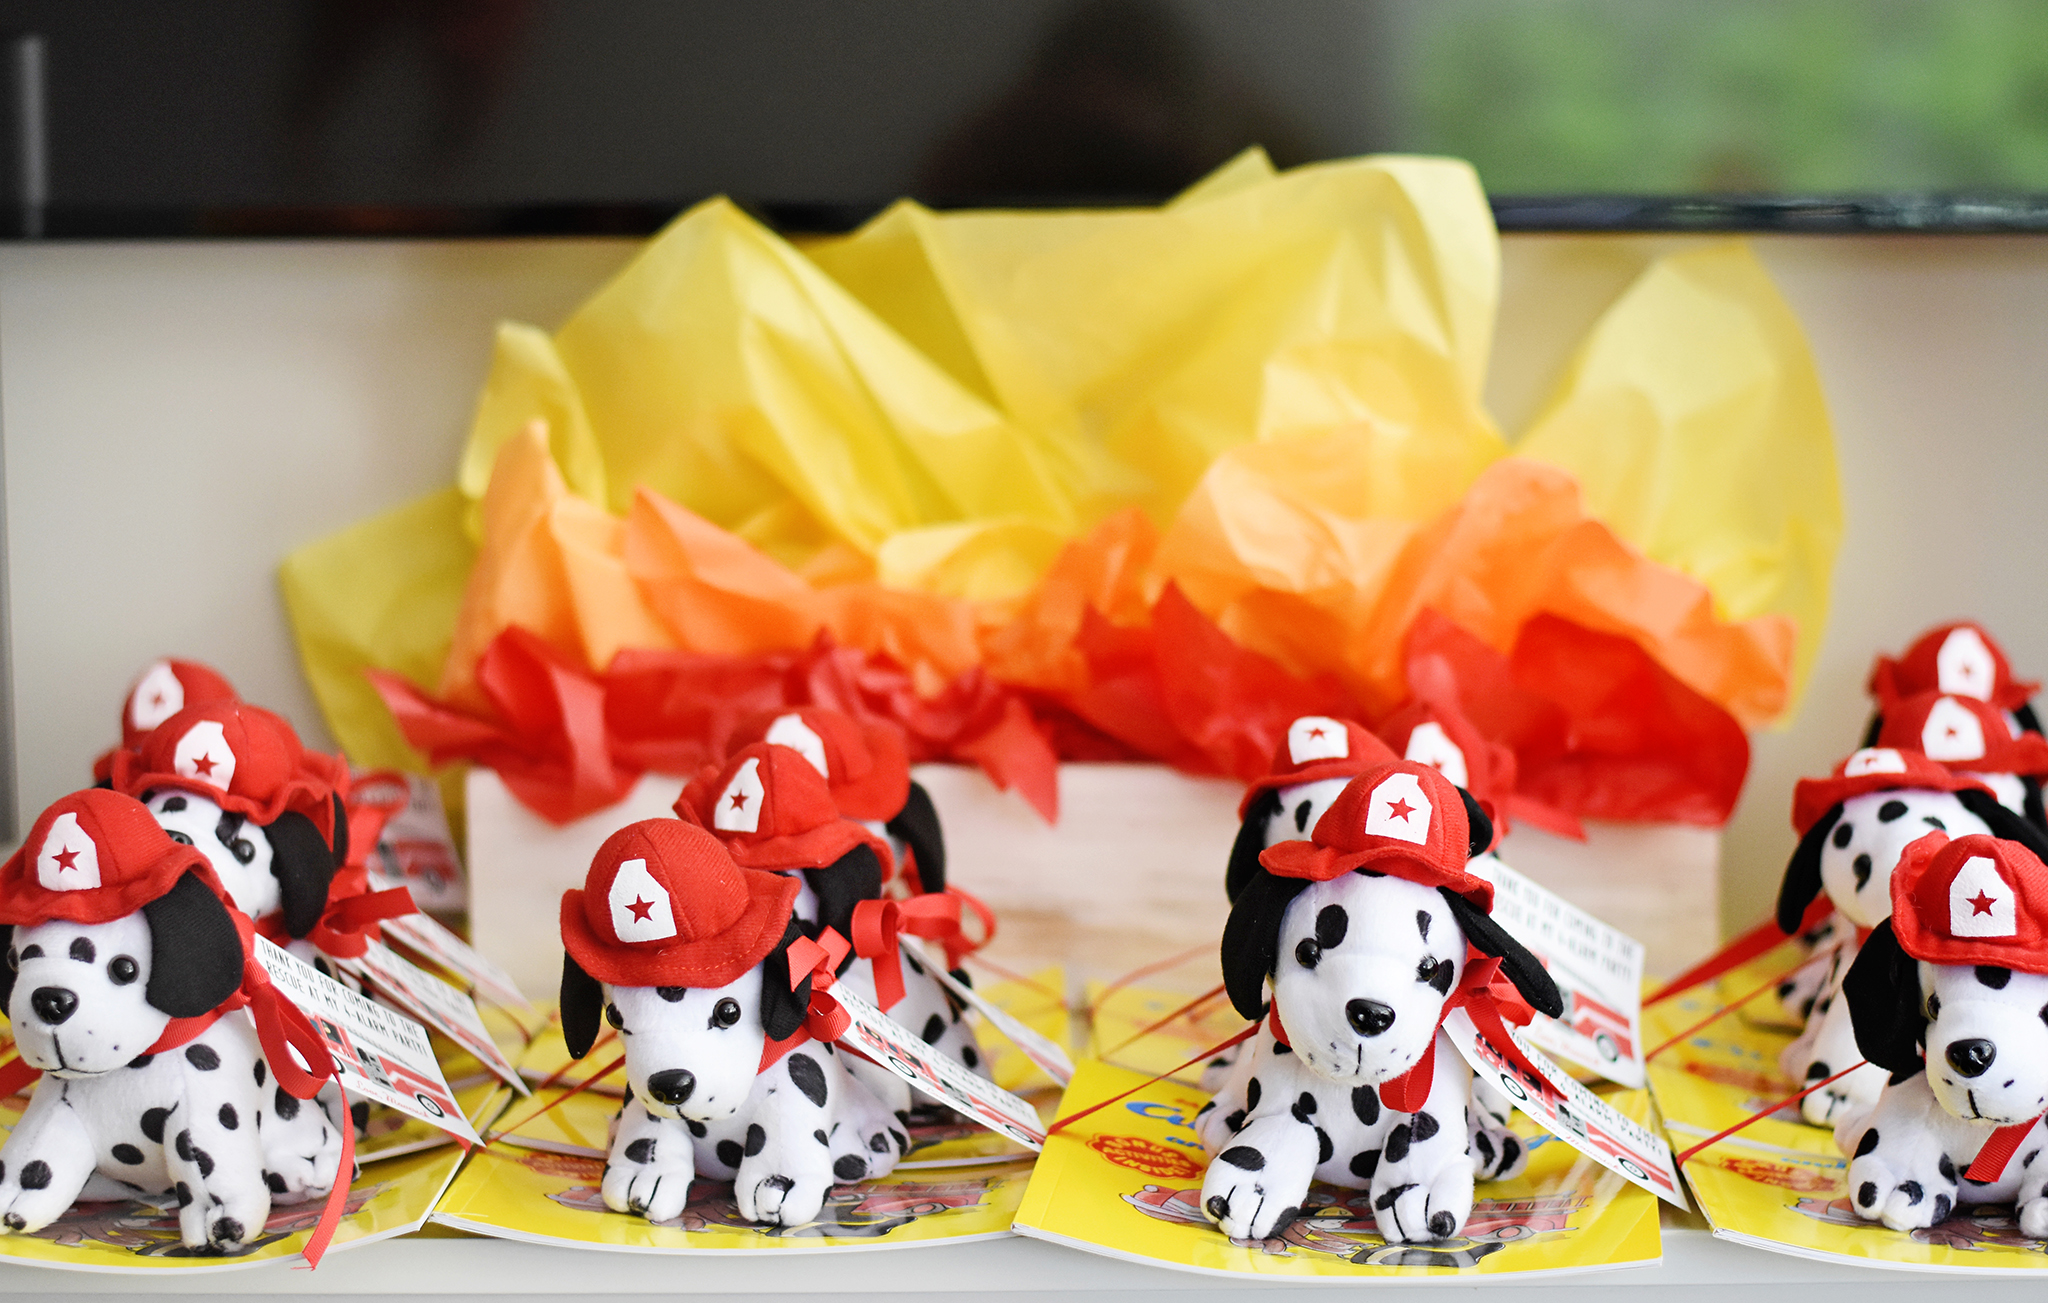 Fire Truck Party Favors - Dalmatian Puppies and Books!